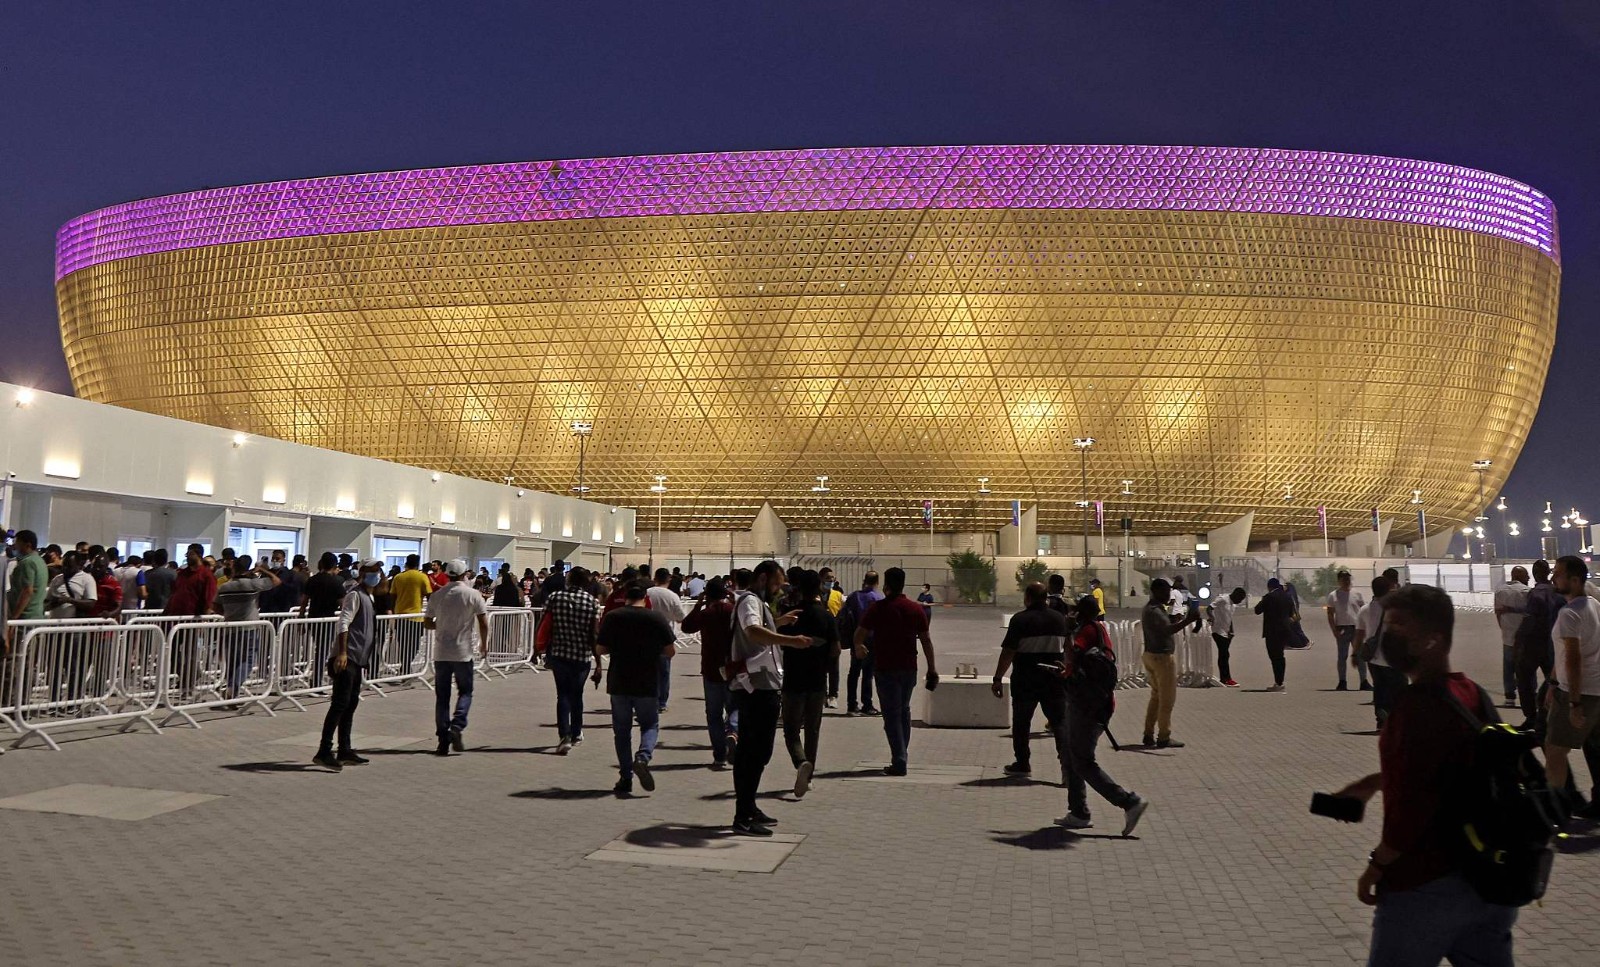 Soccer fans are seen in front of the Lusail Stadium in Lusail, Qatar on September 9, 2022./CFP